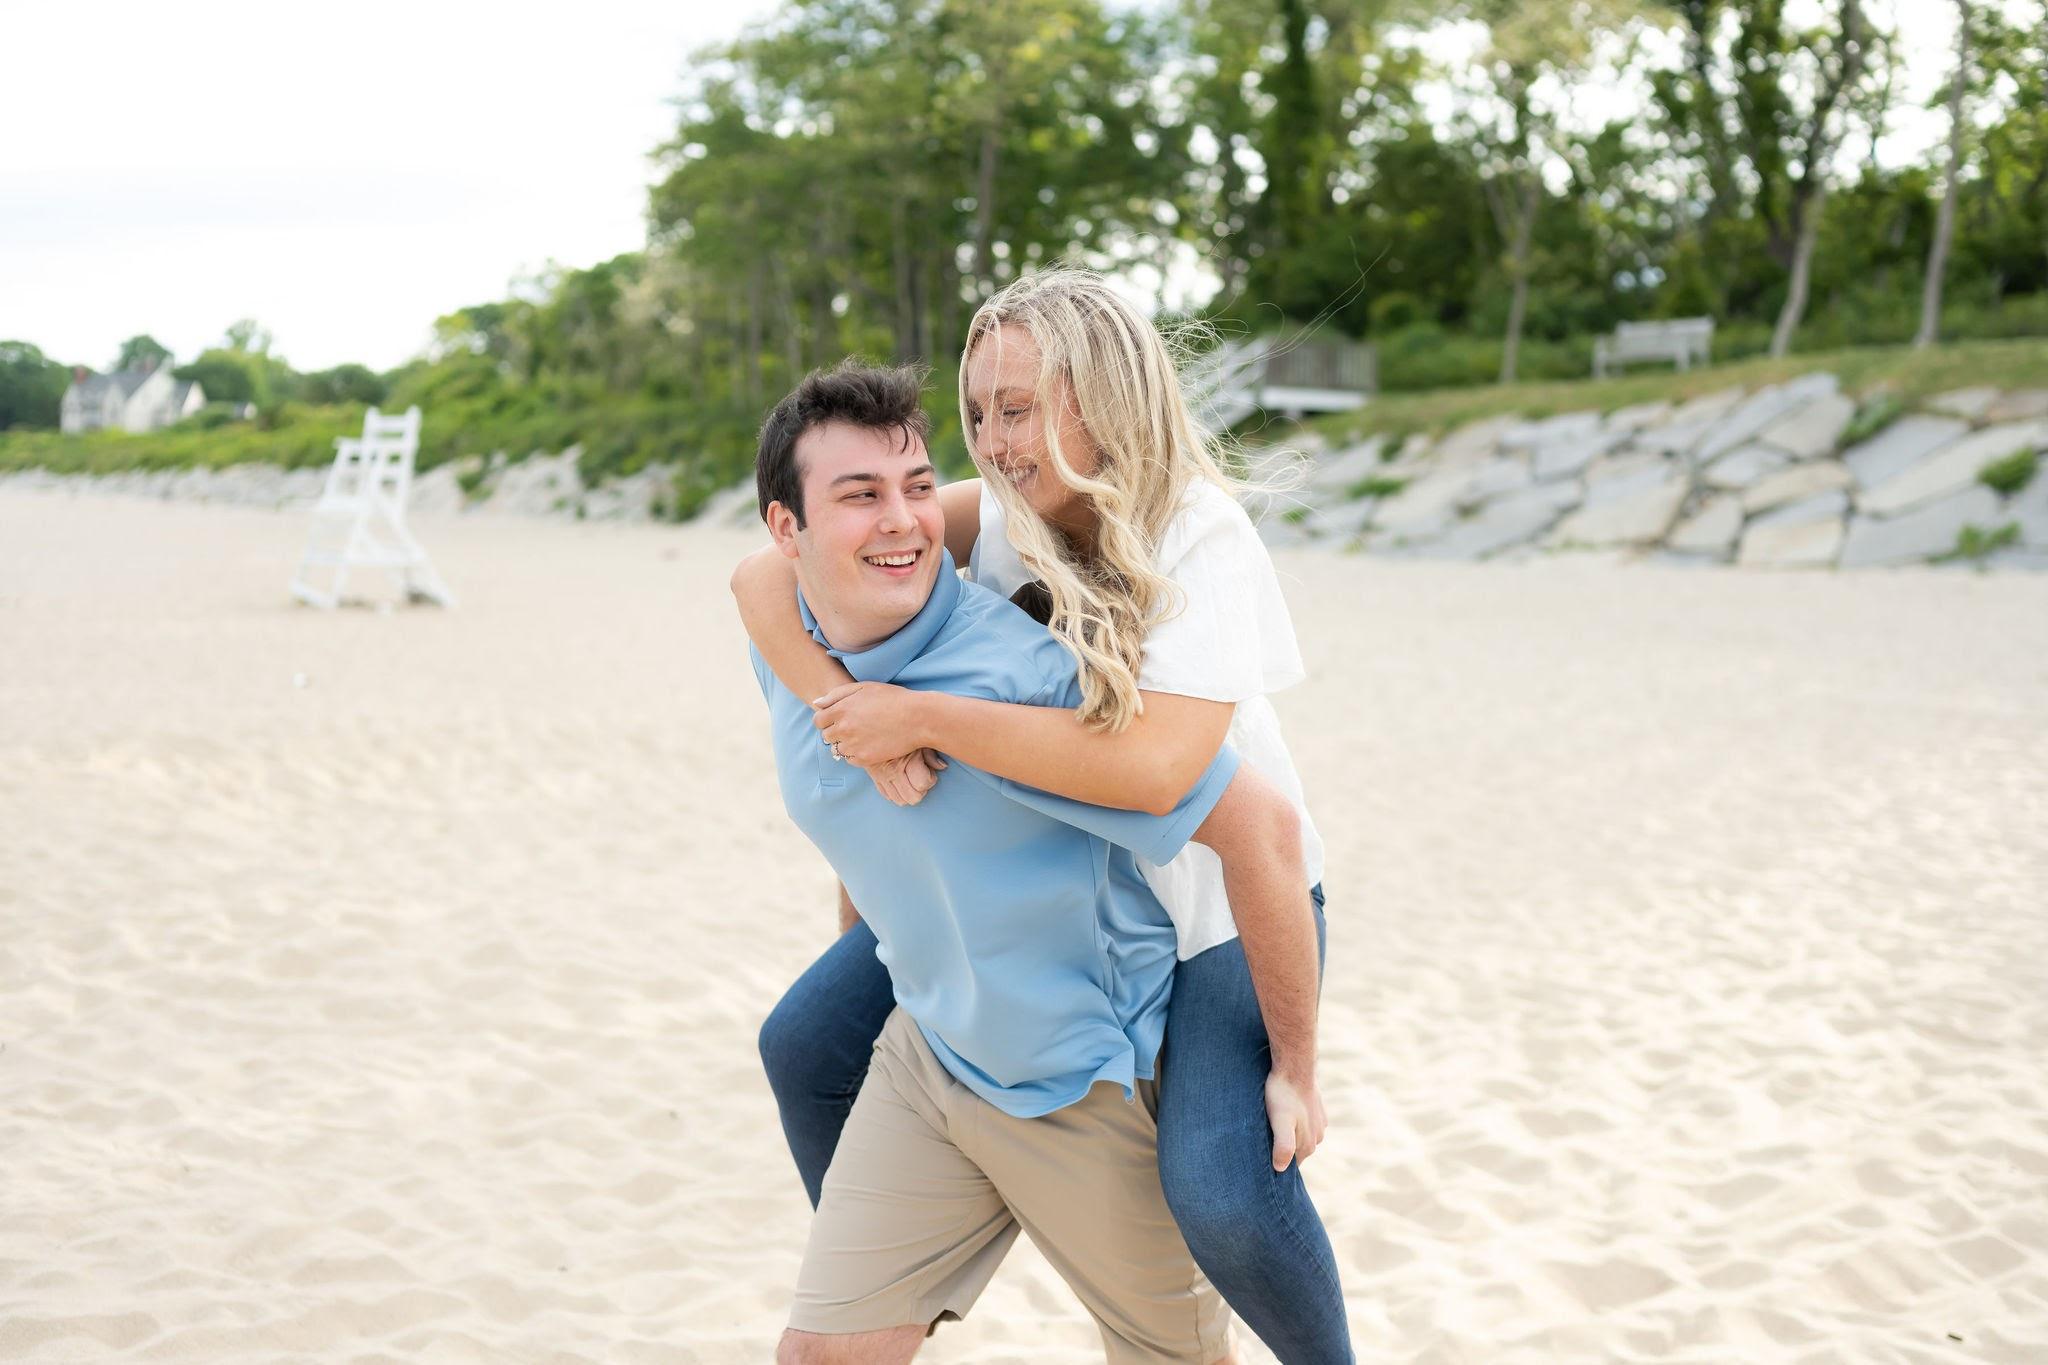 The Wedding Website of Hannah Tight and Kyle Cote